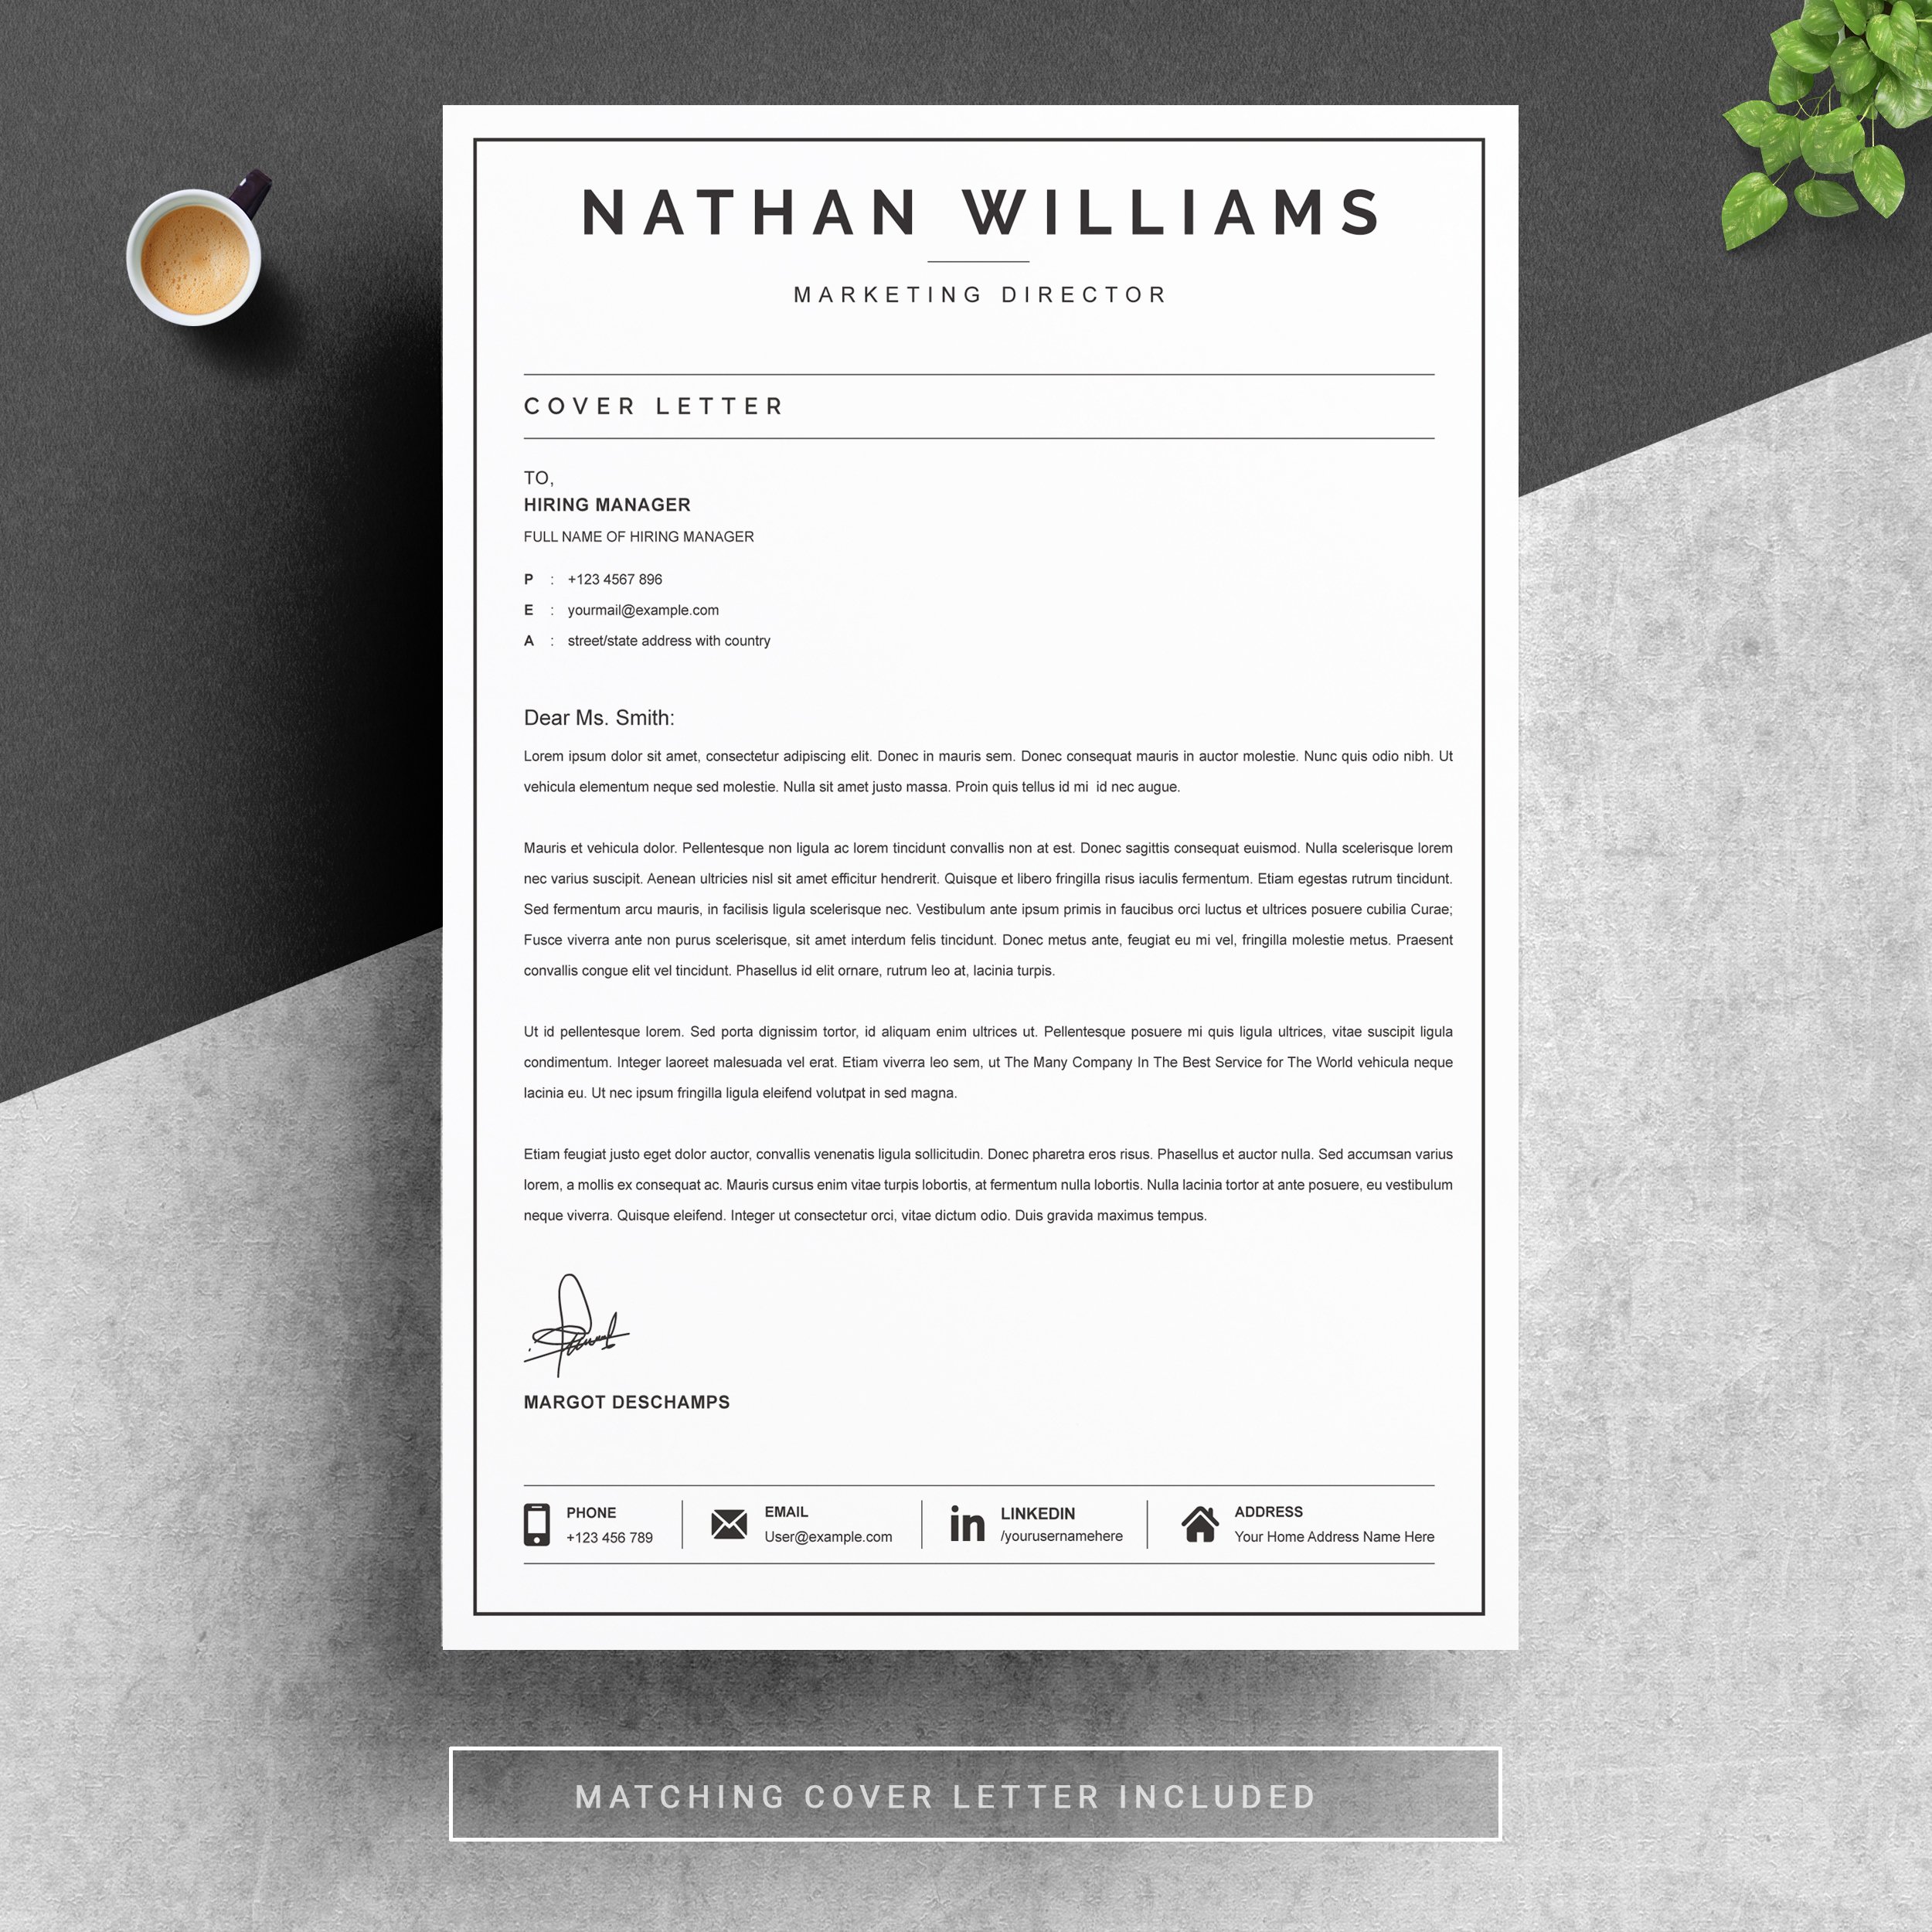 04 resume cover letter page free resume design template 804